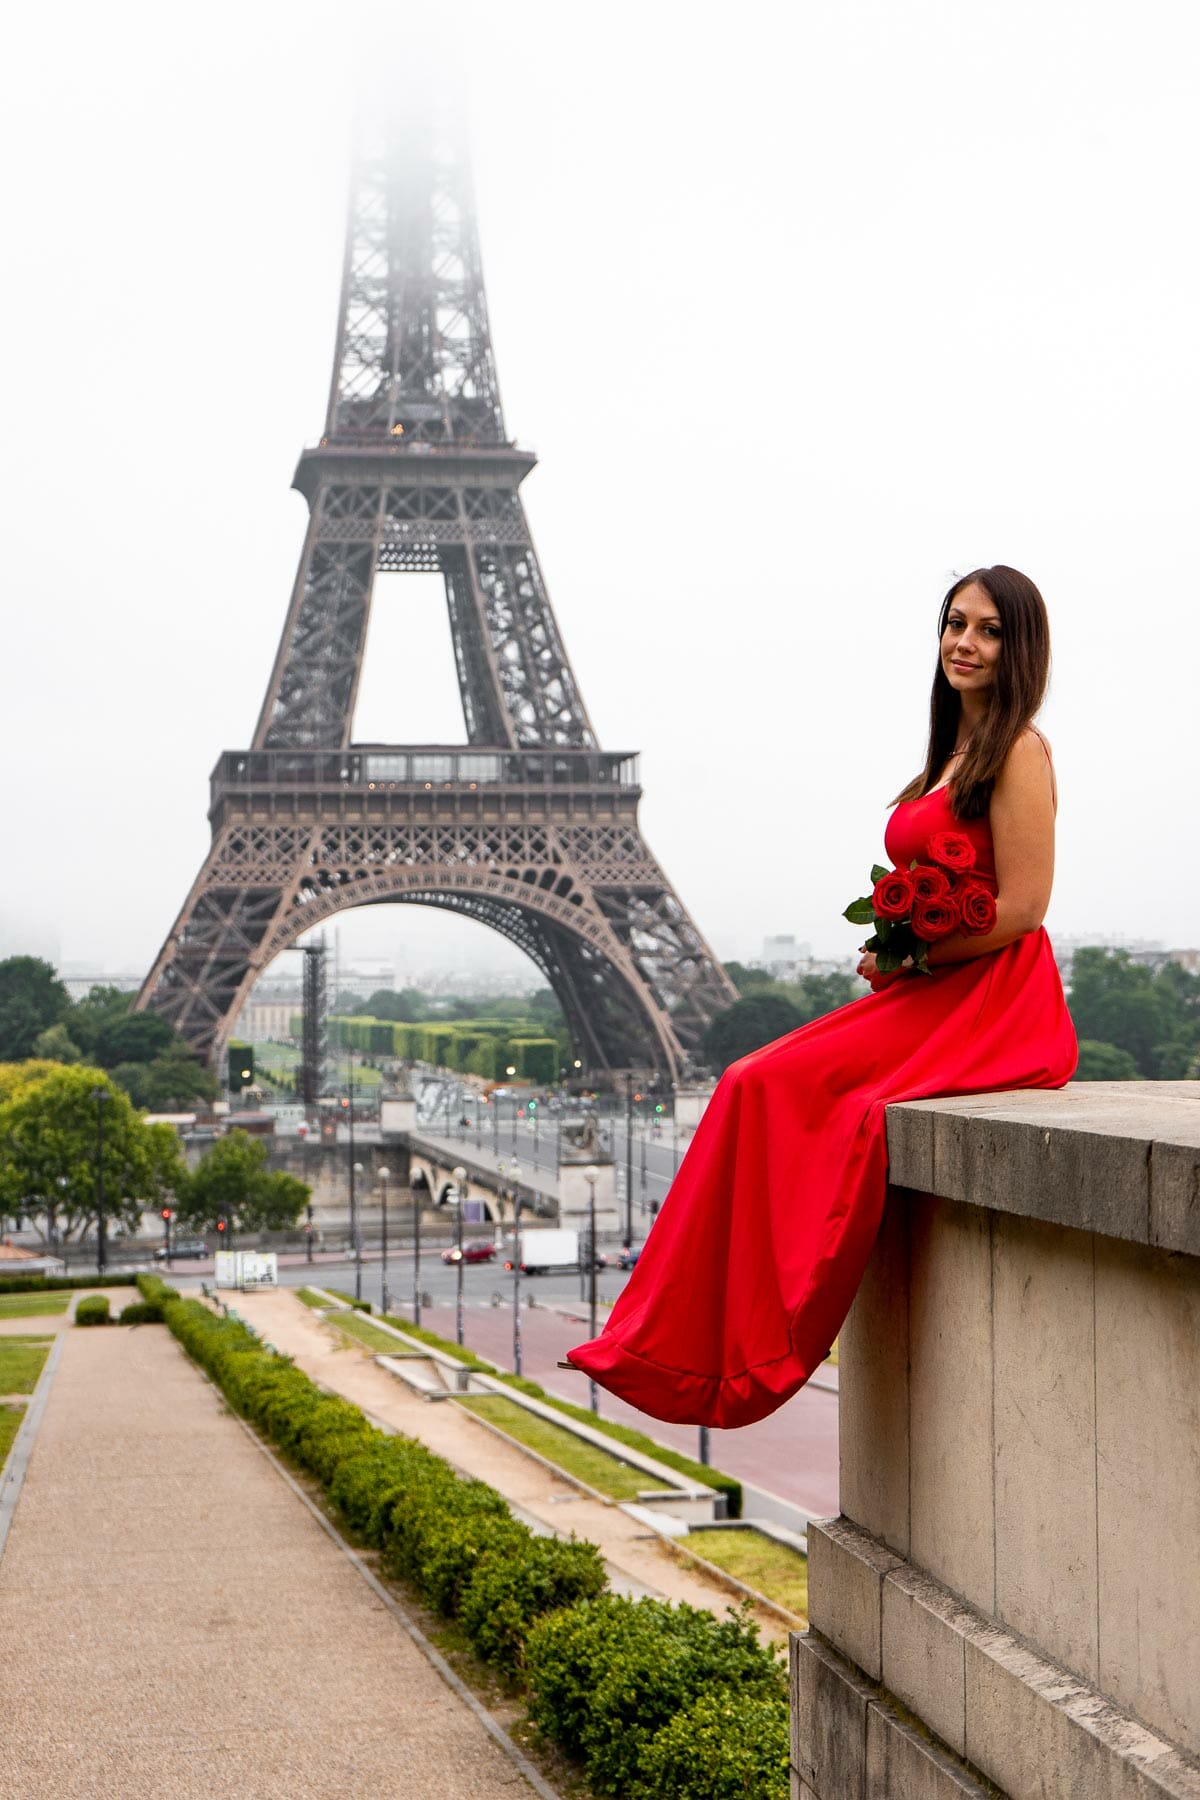 Girl in a red dress sitting at Trocadero in front of the Eiffel Tower